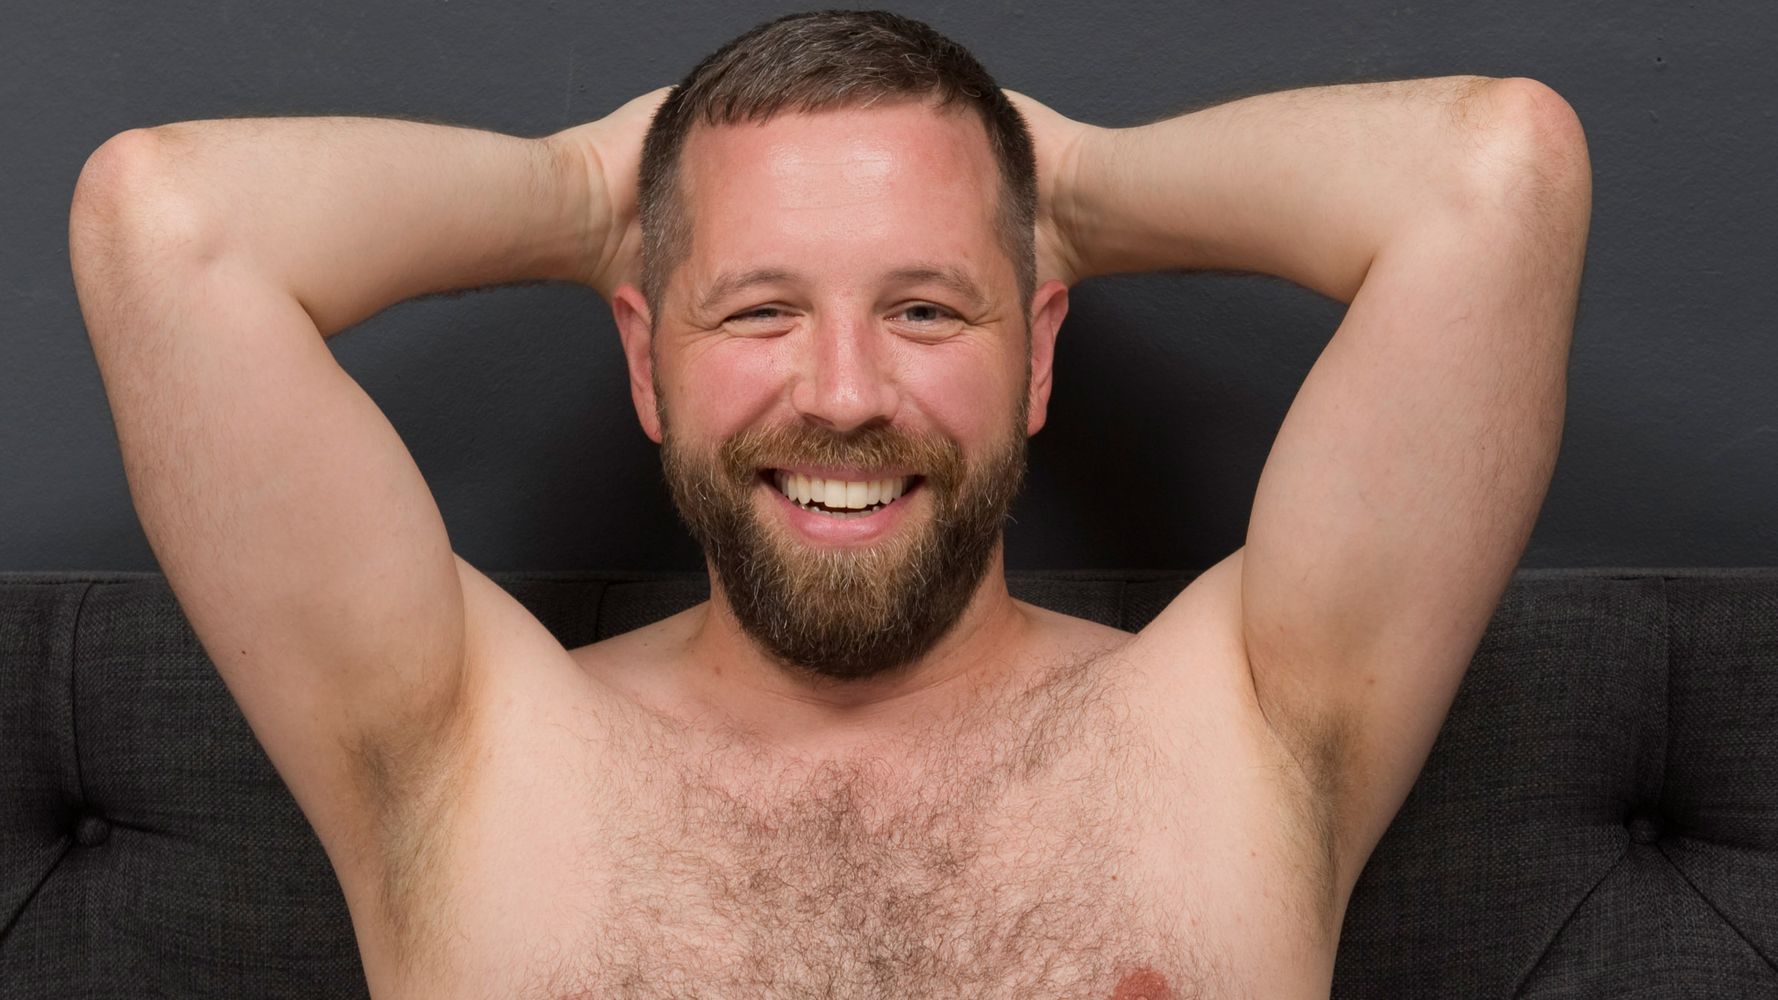 Normal Gay Men Porn - This Naked Calendar Celebrates Gay Men With 'Ordinary' Bodies | HuffPost